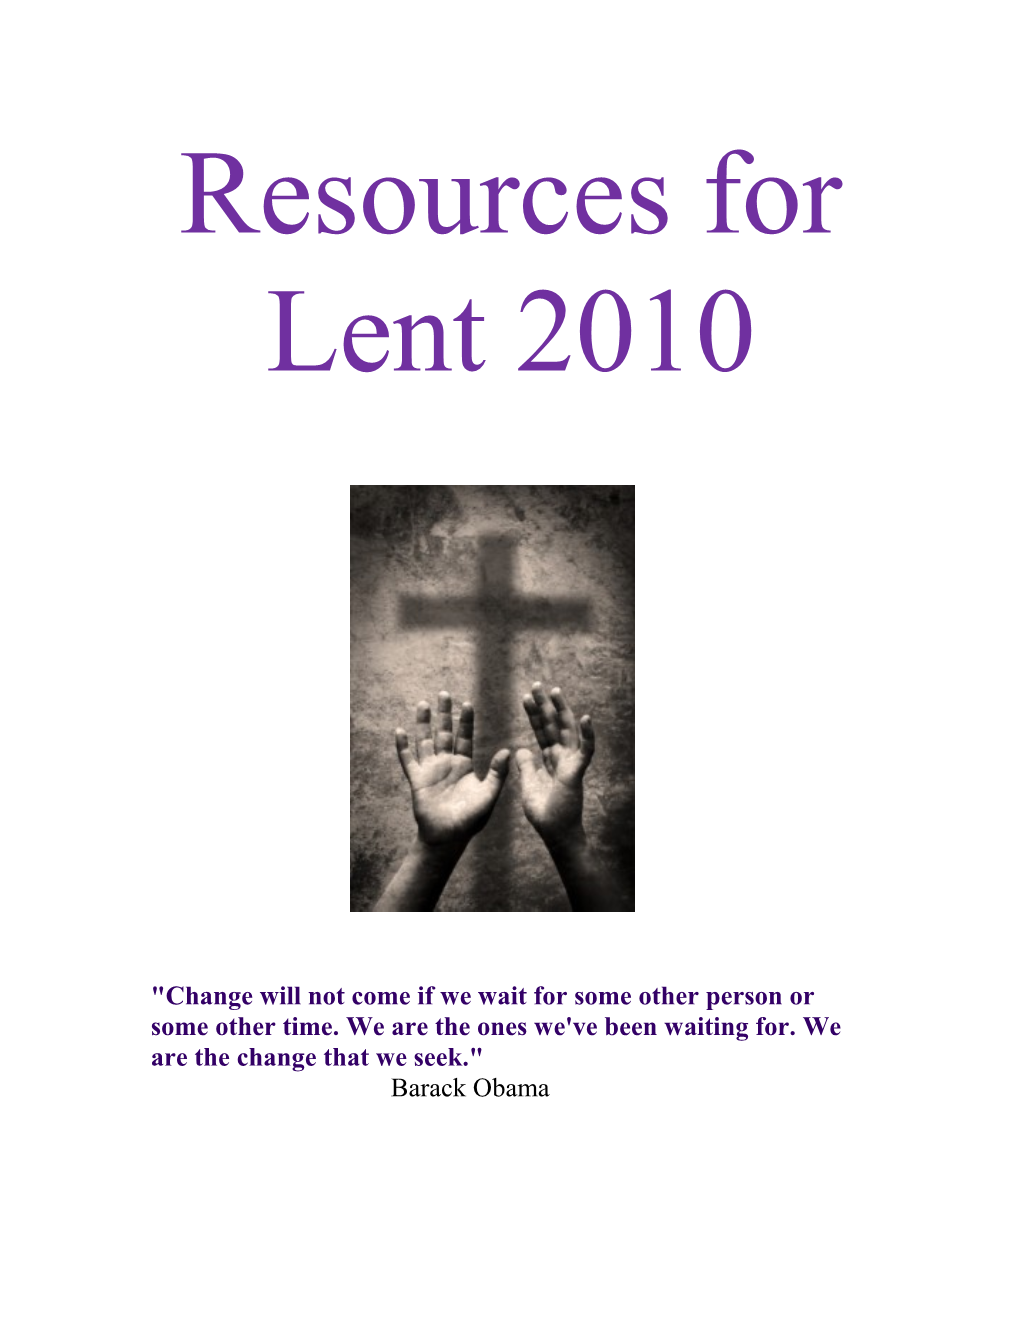 Resources for Lent